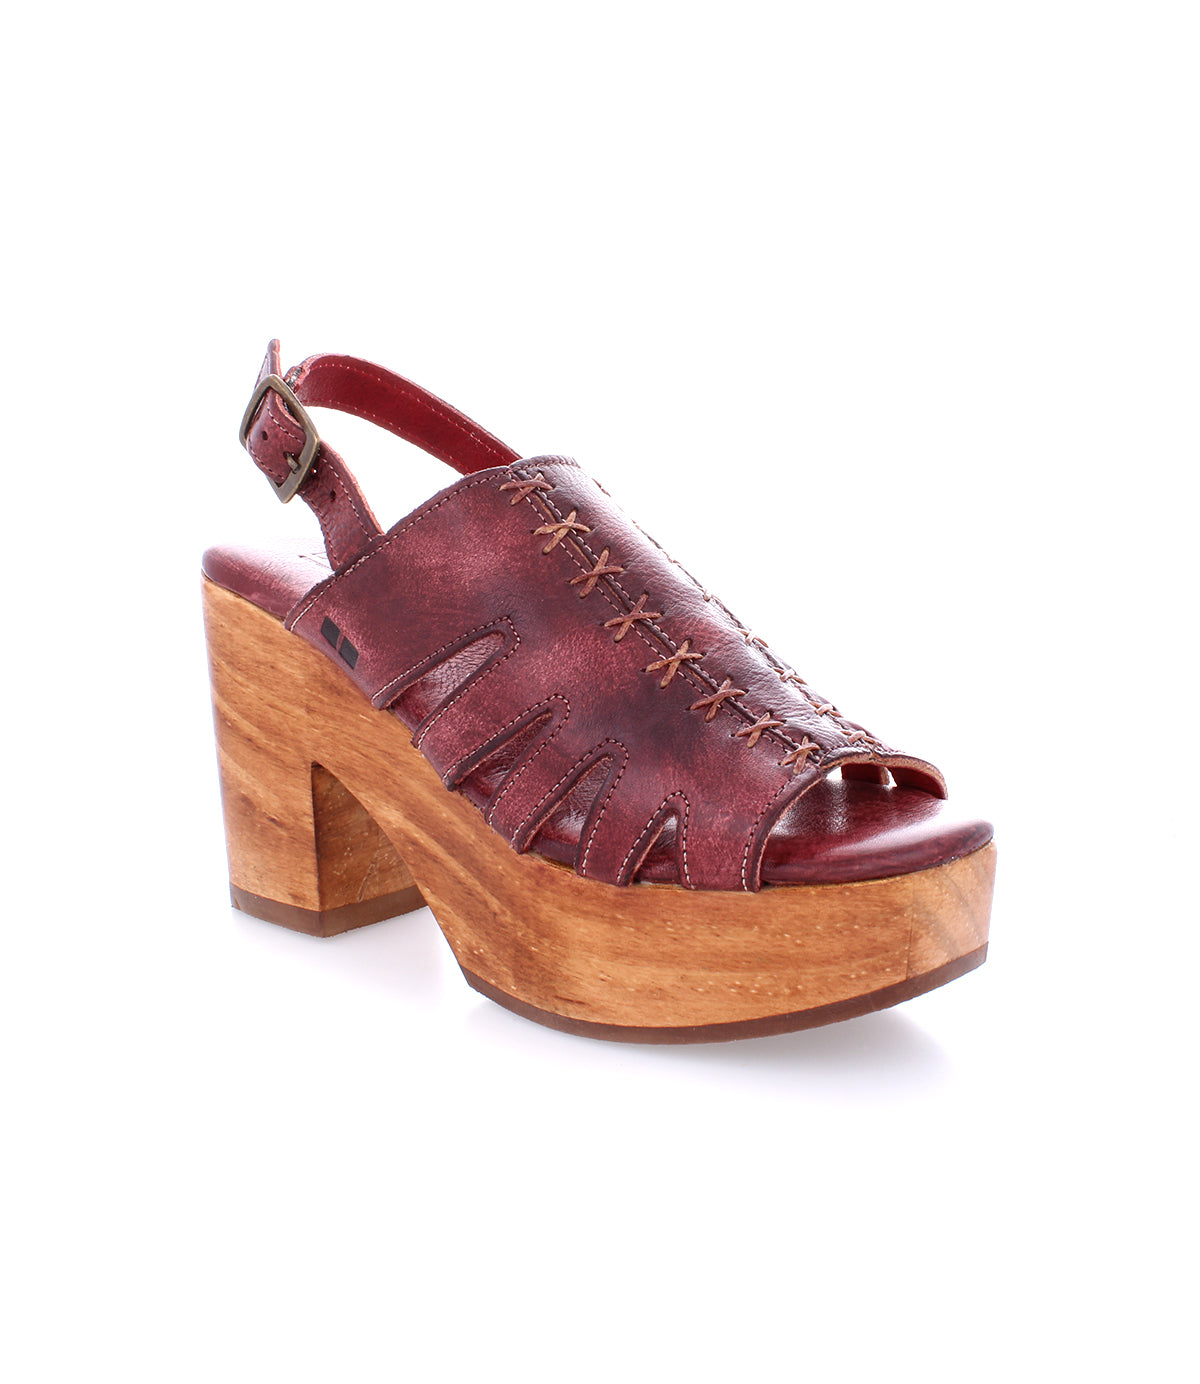 A women's sandal with a wooden platform called Fontella by Bed Stu.